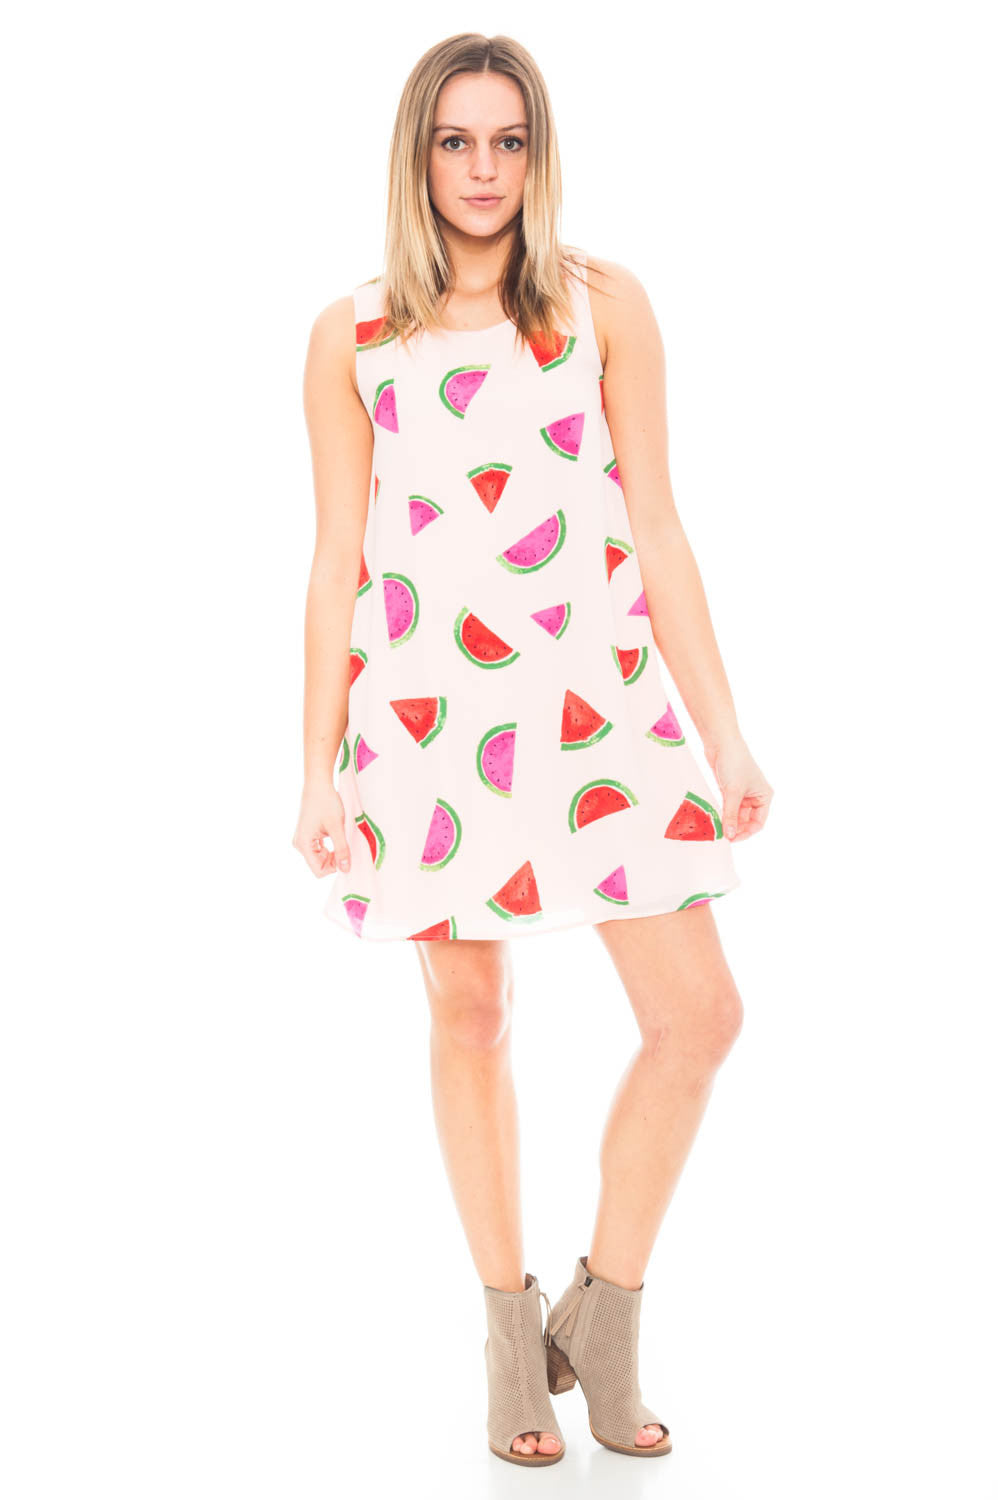 Dress - Watermelon Shift Dress with Strappy Back Detail by Everly